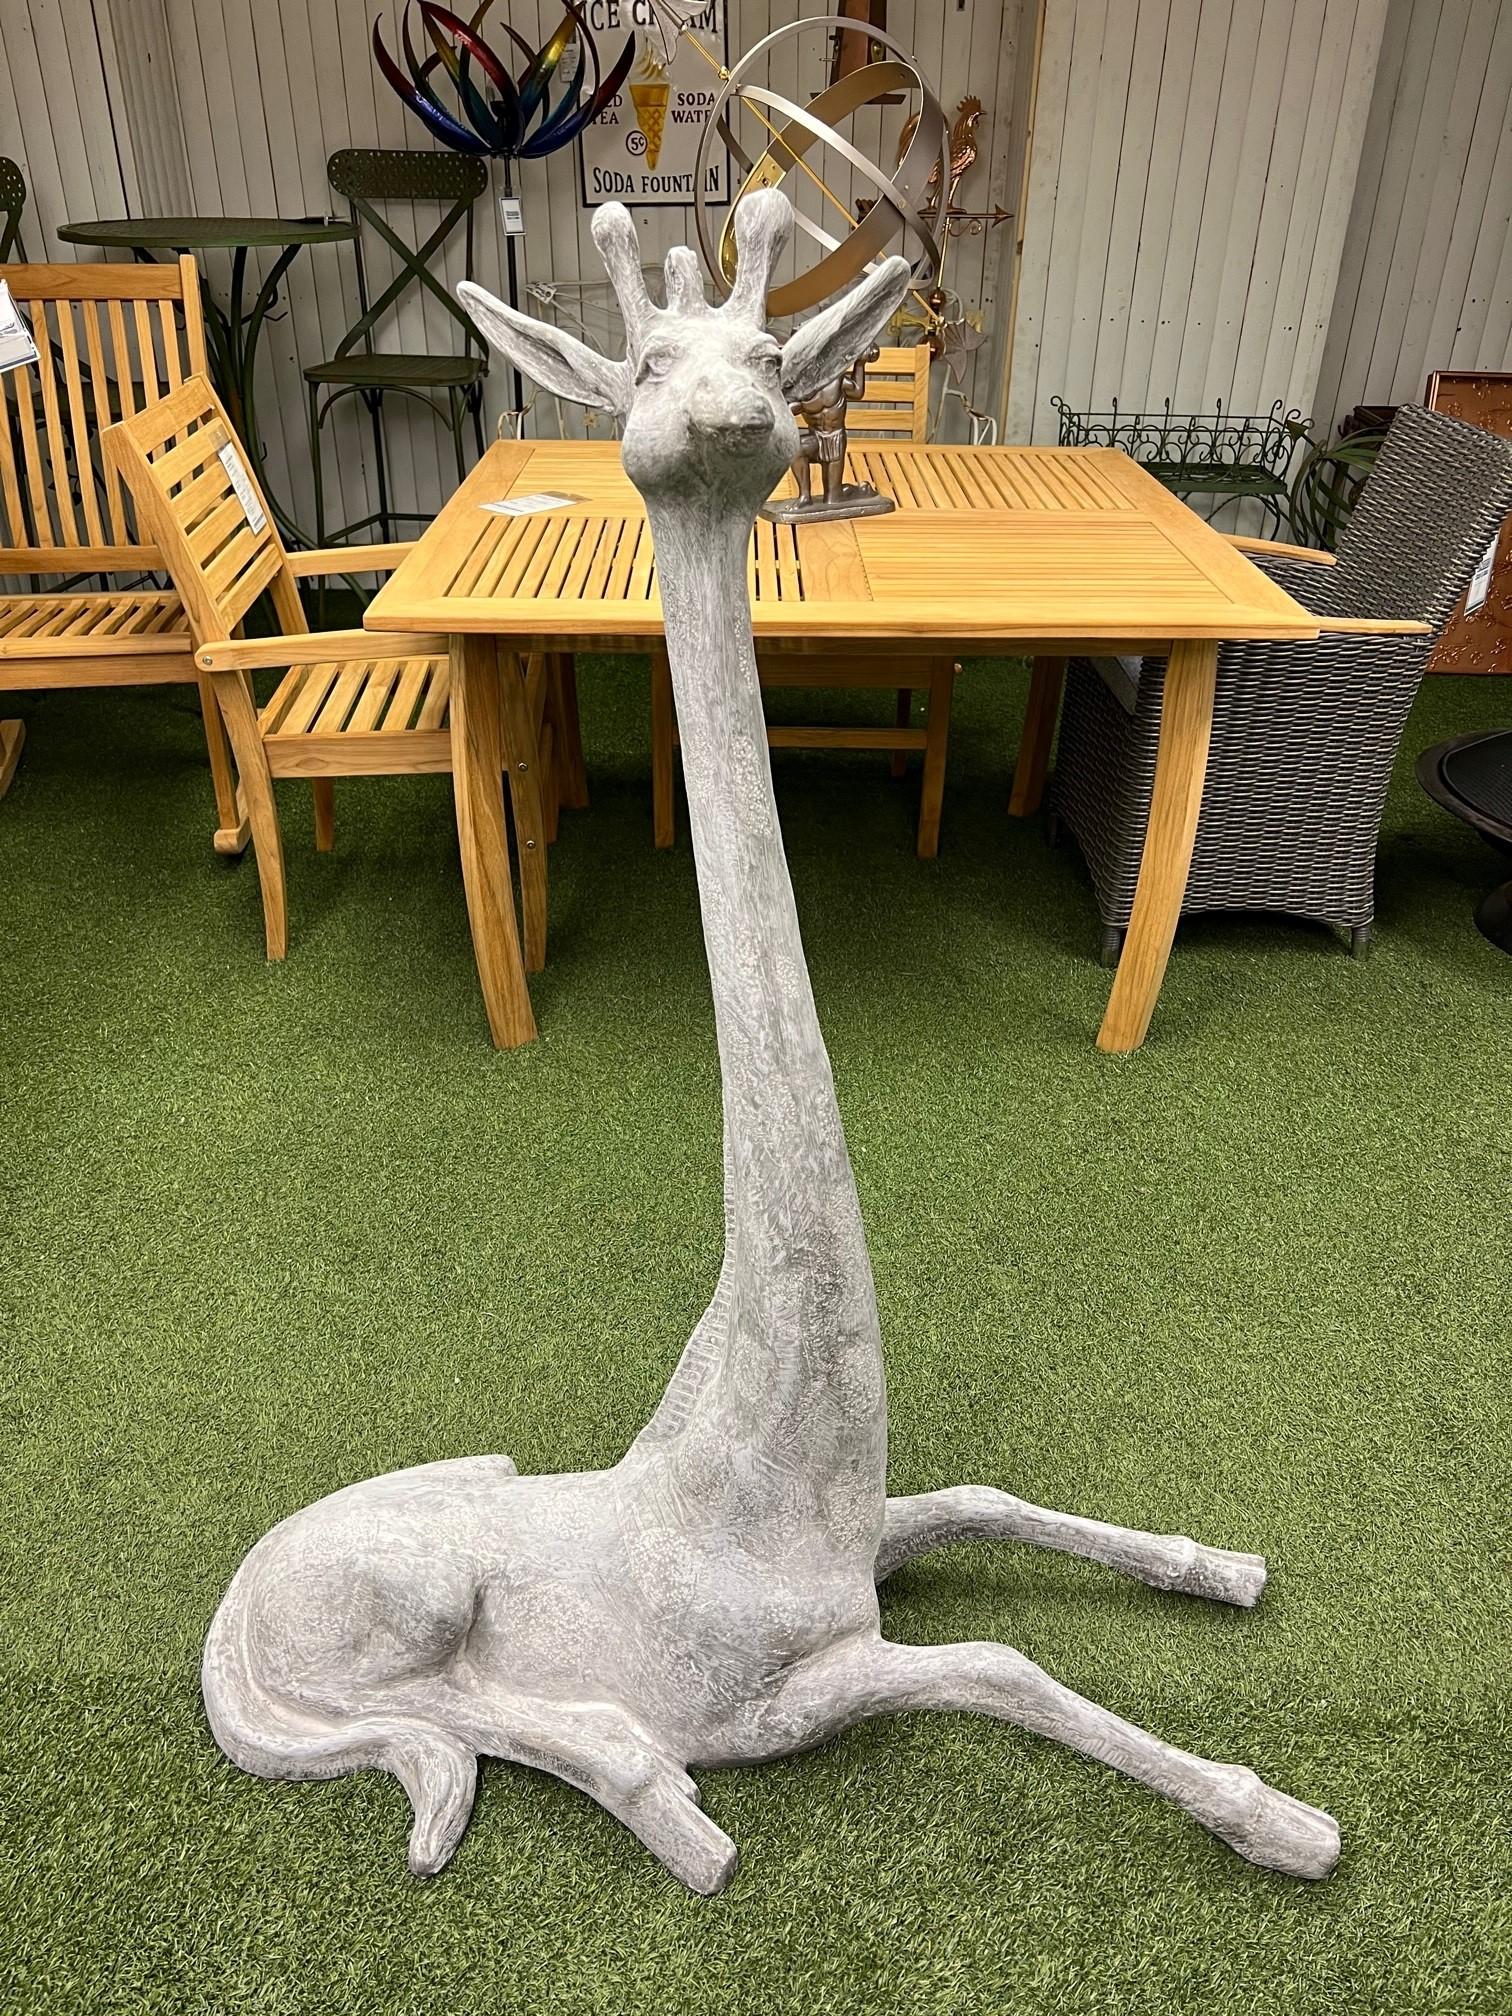 Fiberglass baby giraffe made of very durable fiberglass which will withstand the elements. A fun piece to own which looks great in a yard or garden. The giraffe is one of my favorite animals and looks great in my backyard.